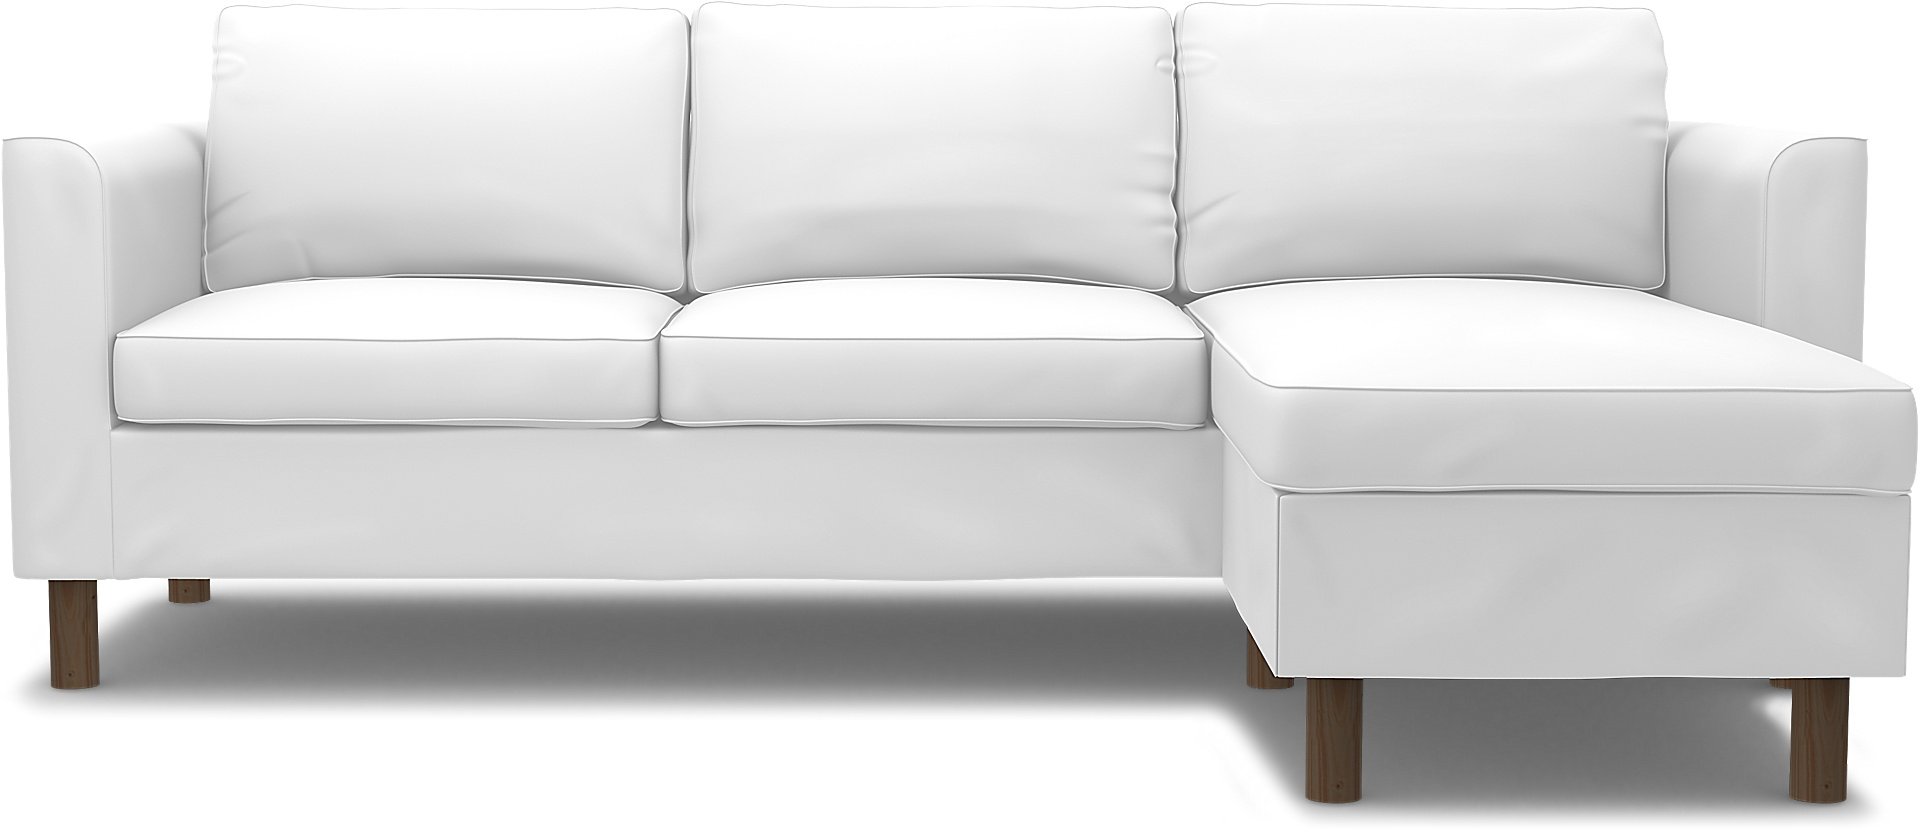 IKEA - Parup 3 Seater with chaise longue, Absolute White, Linen - Bemz